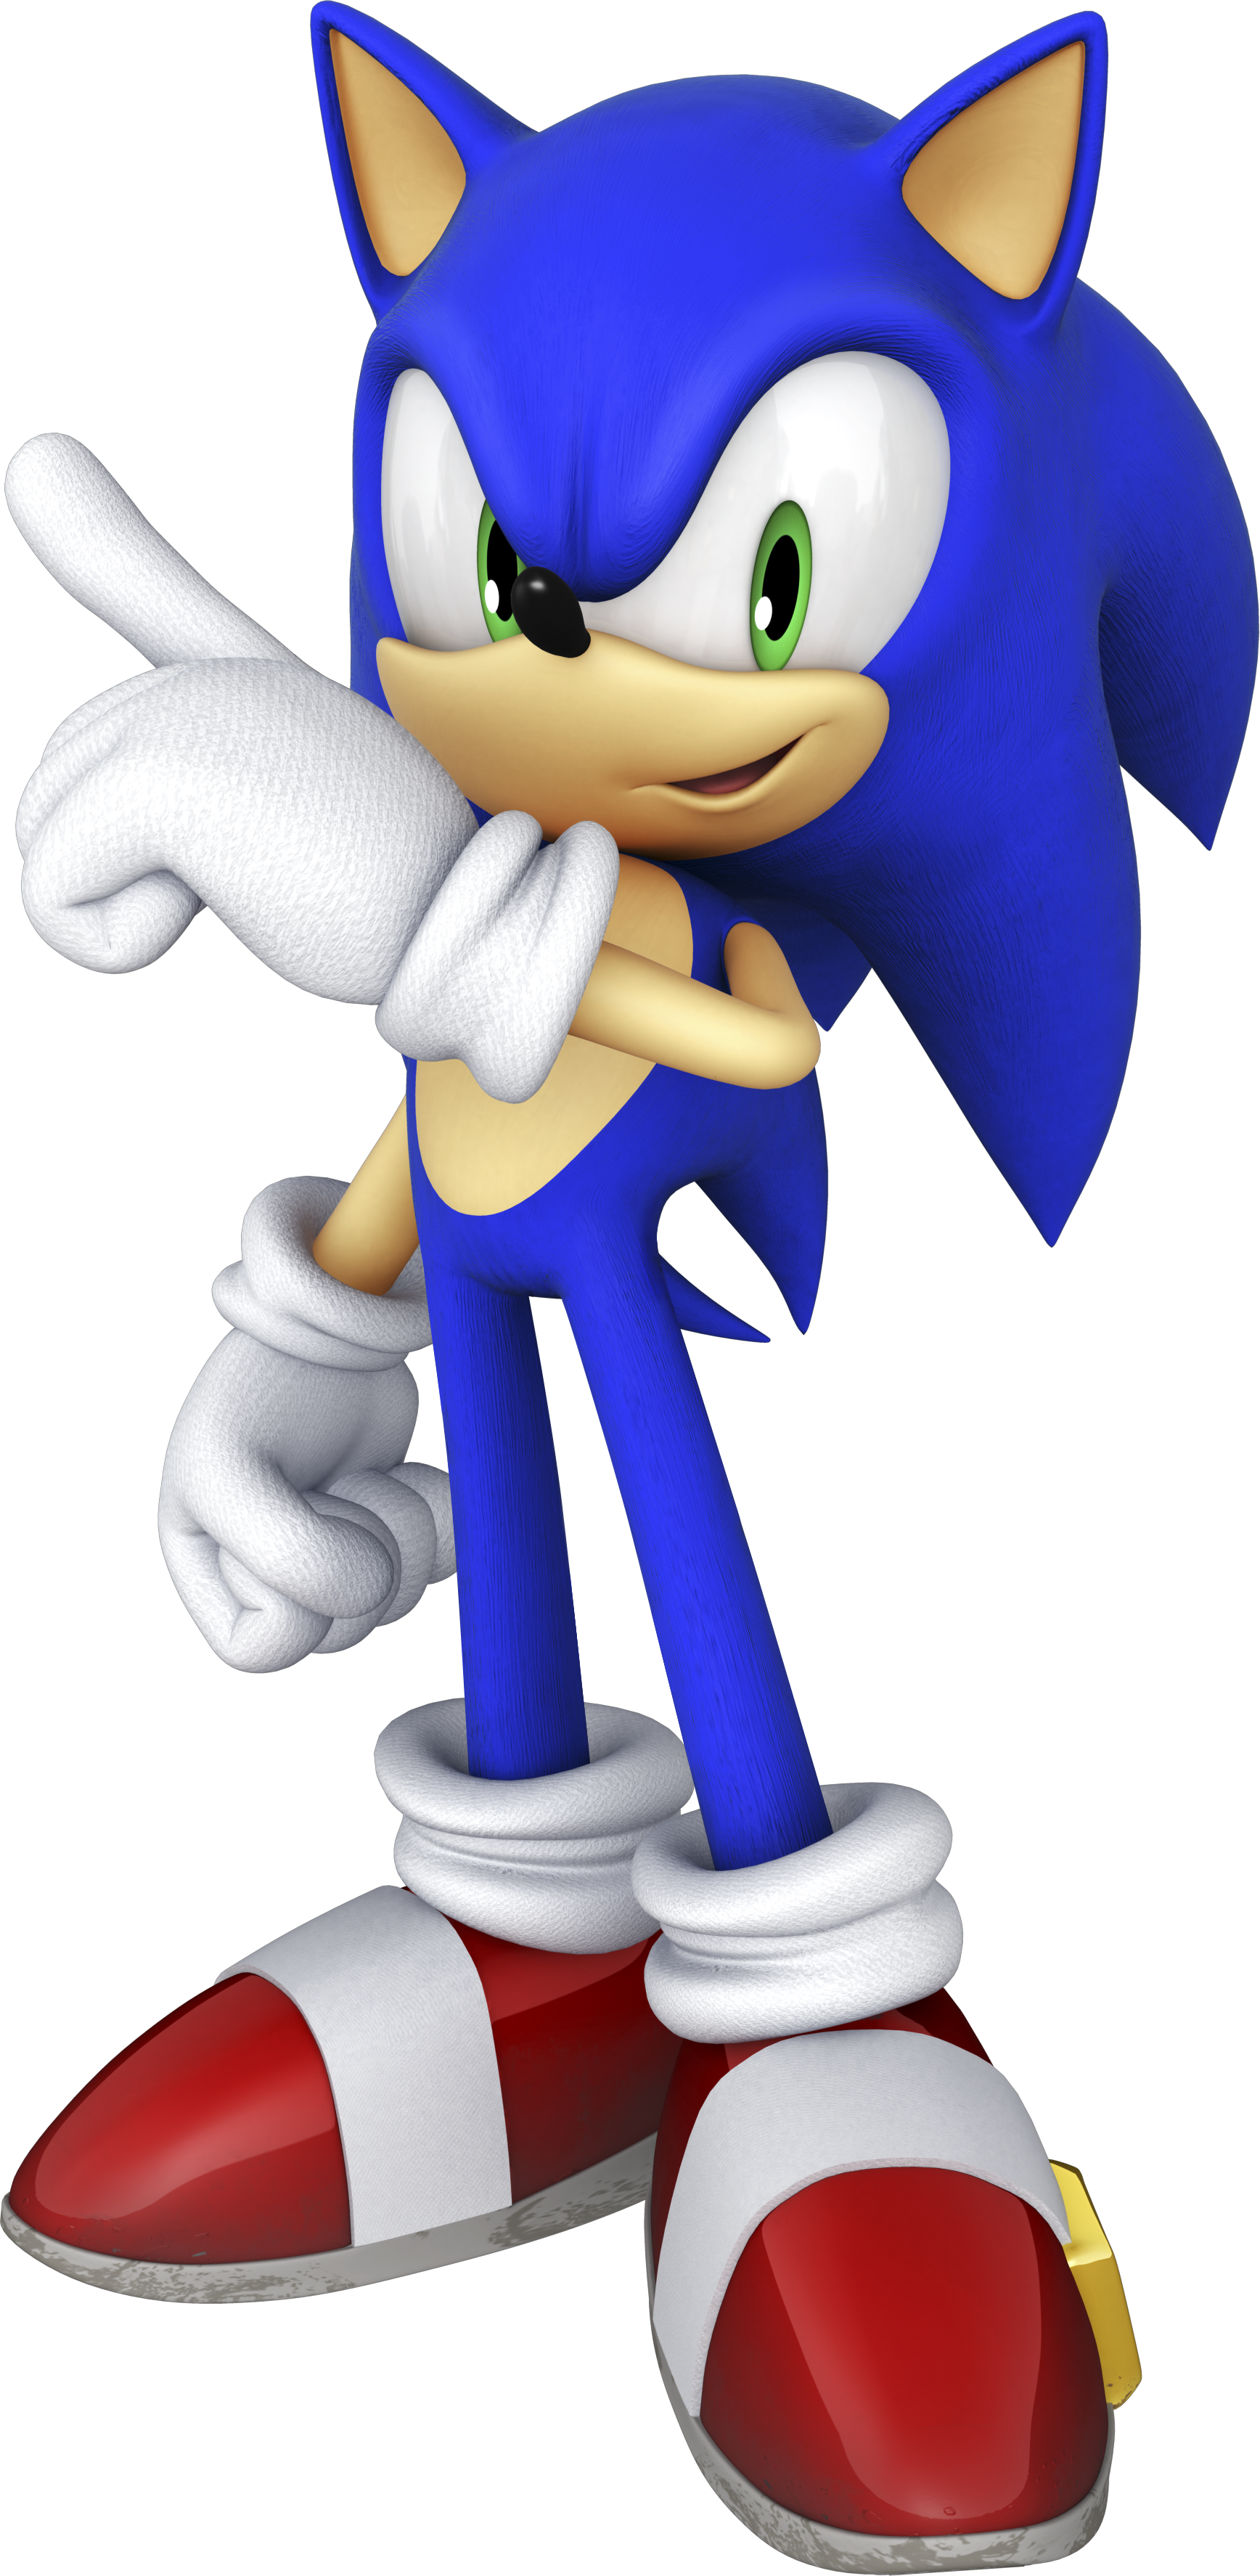 Sonic the Hedgehog from Sonic